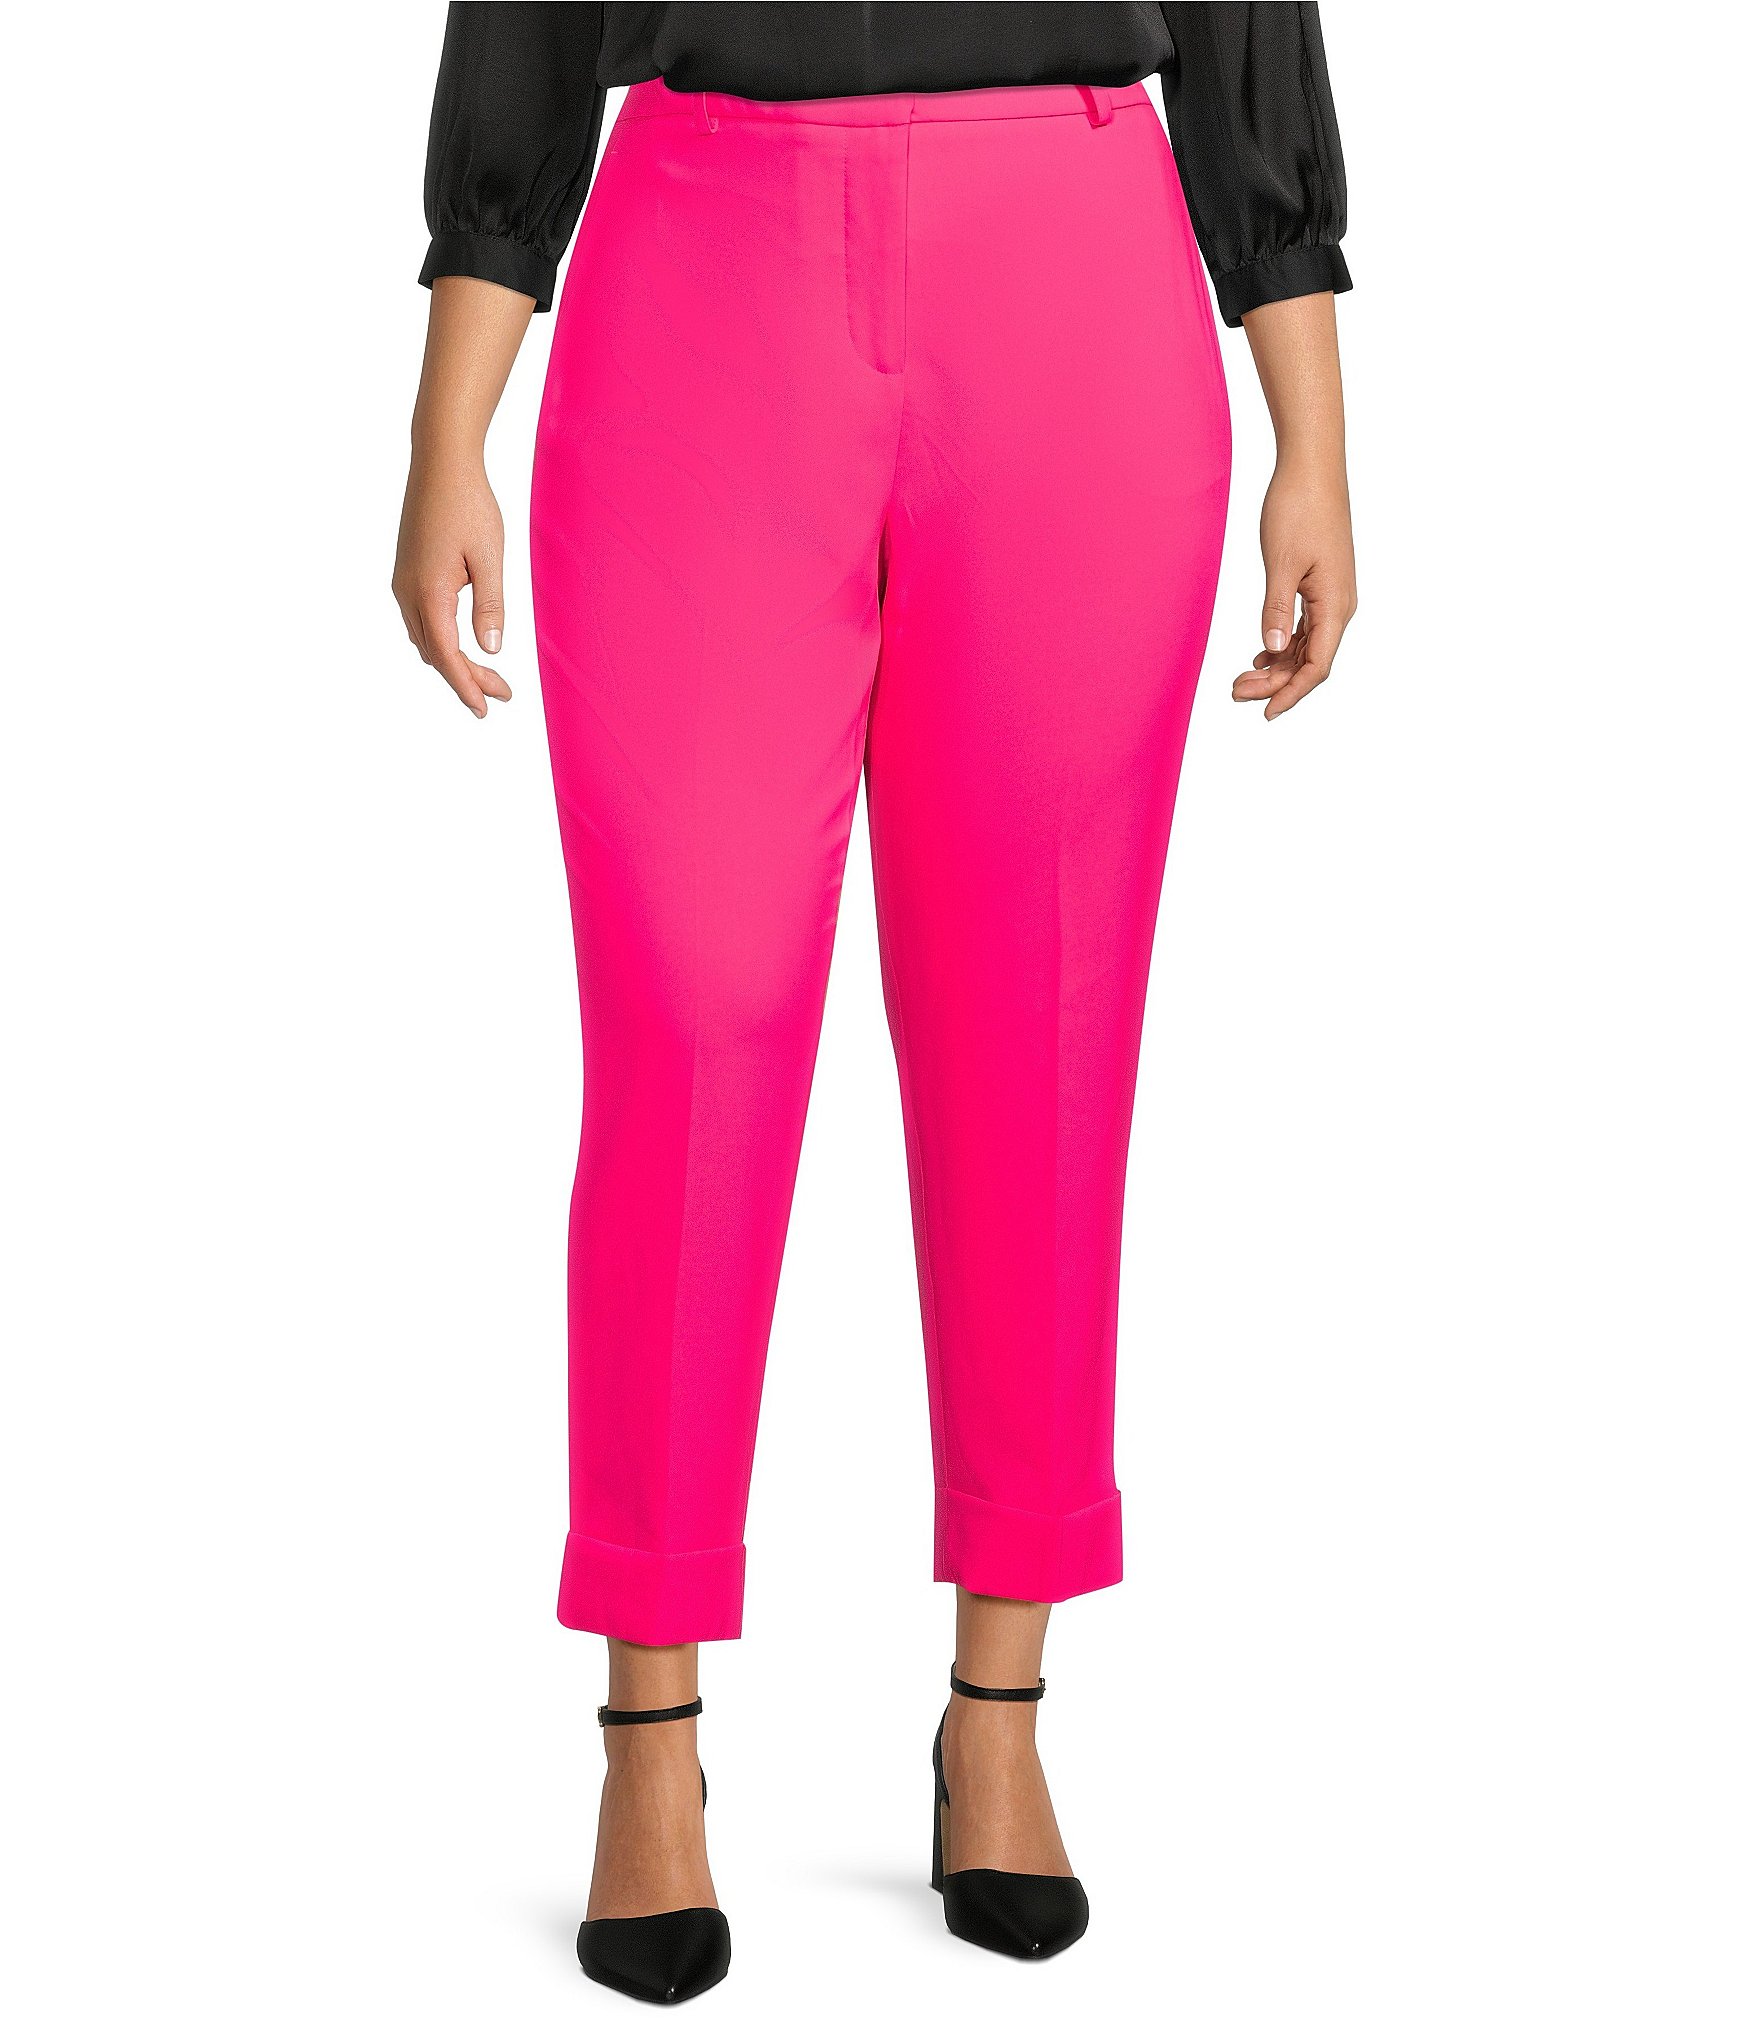 Vince Camuto Tailored Pants w/ Belt